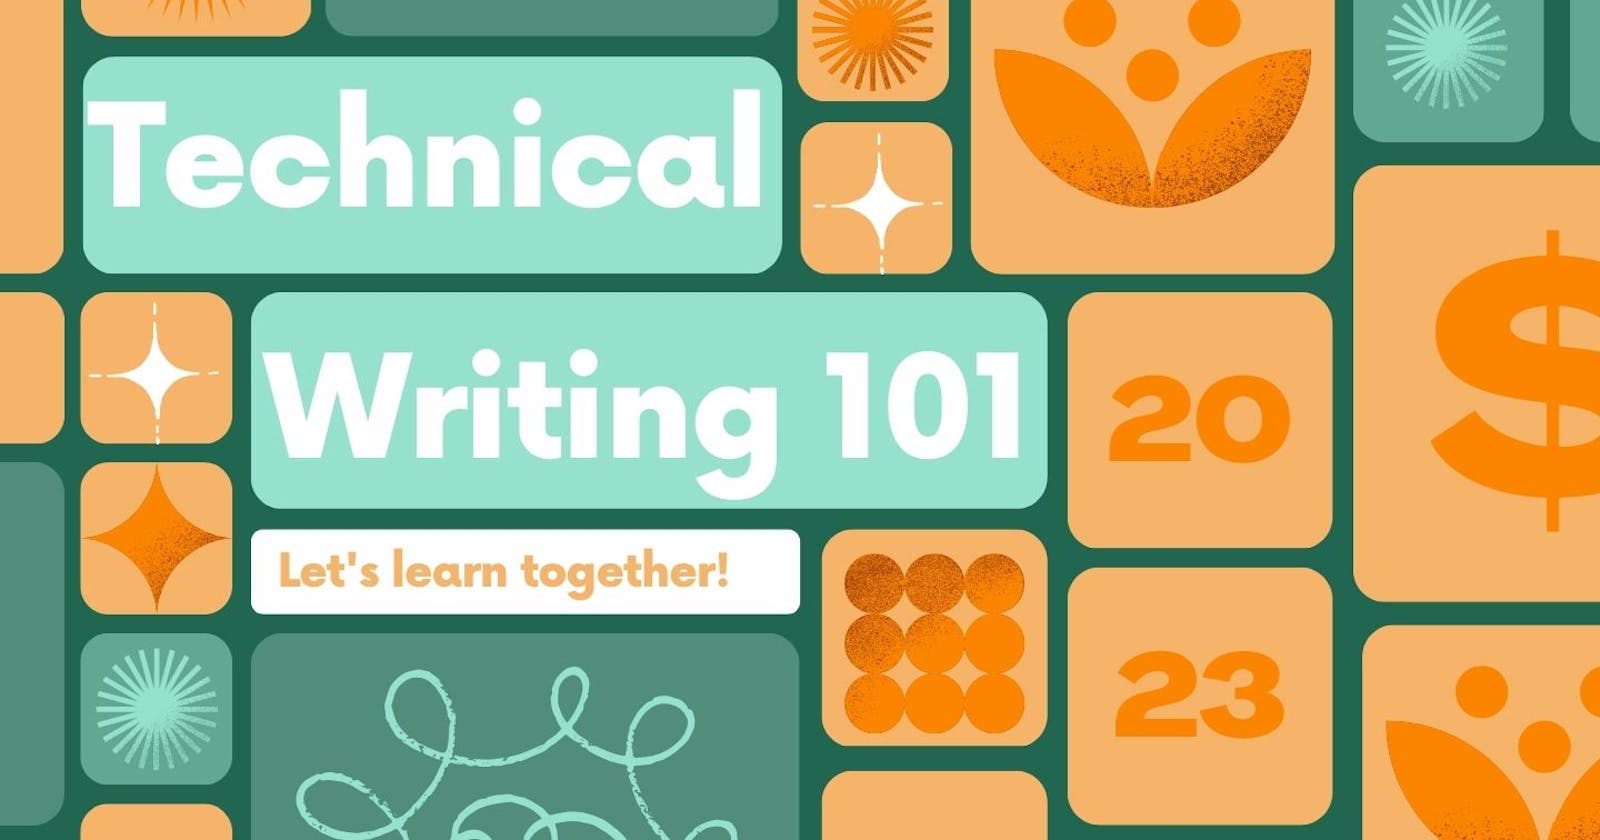 Let's learn together! - Technical Writing 101